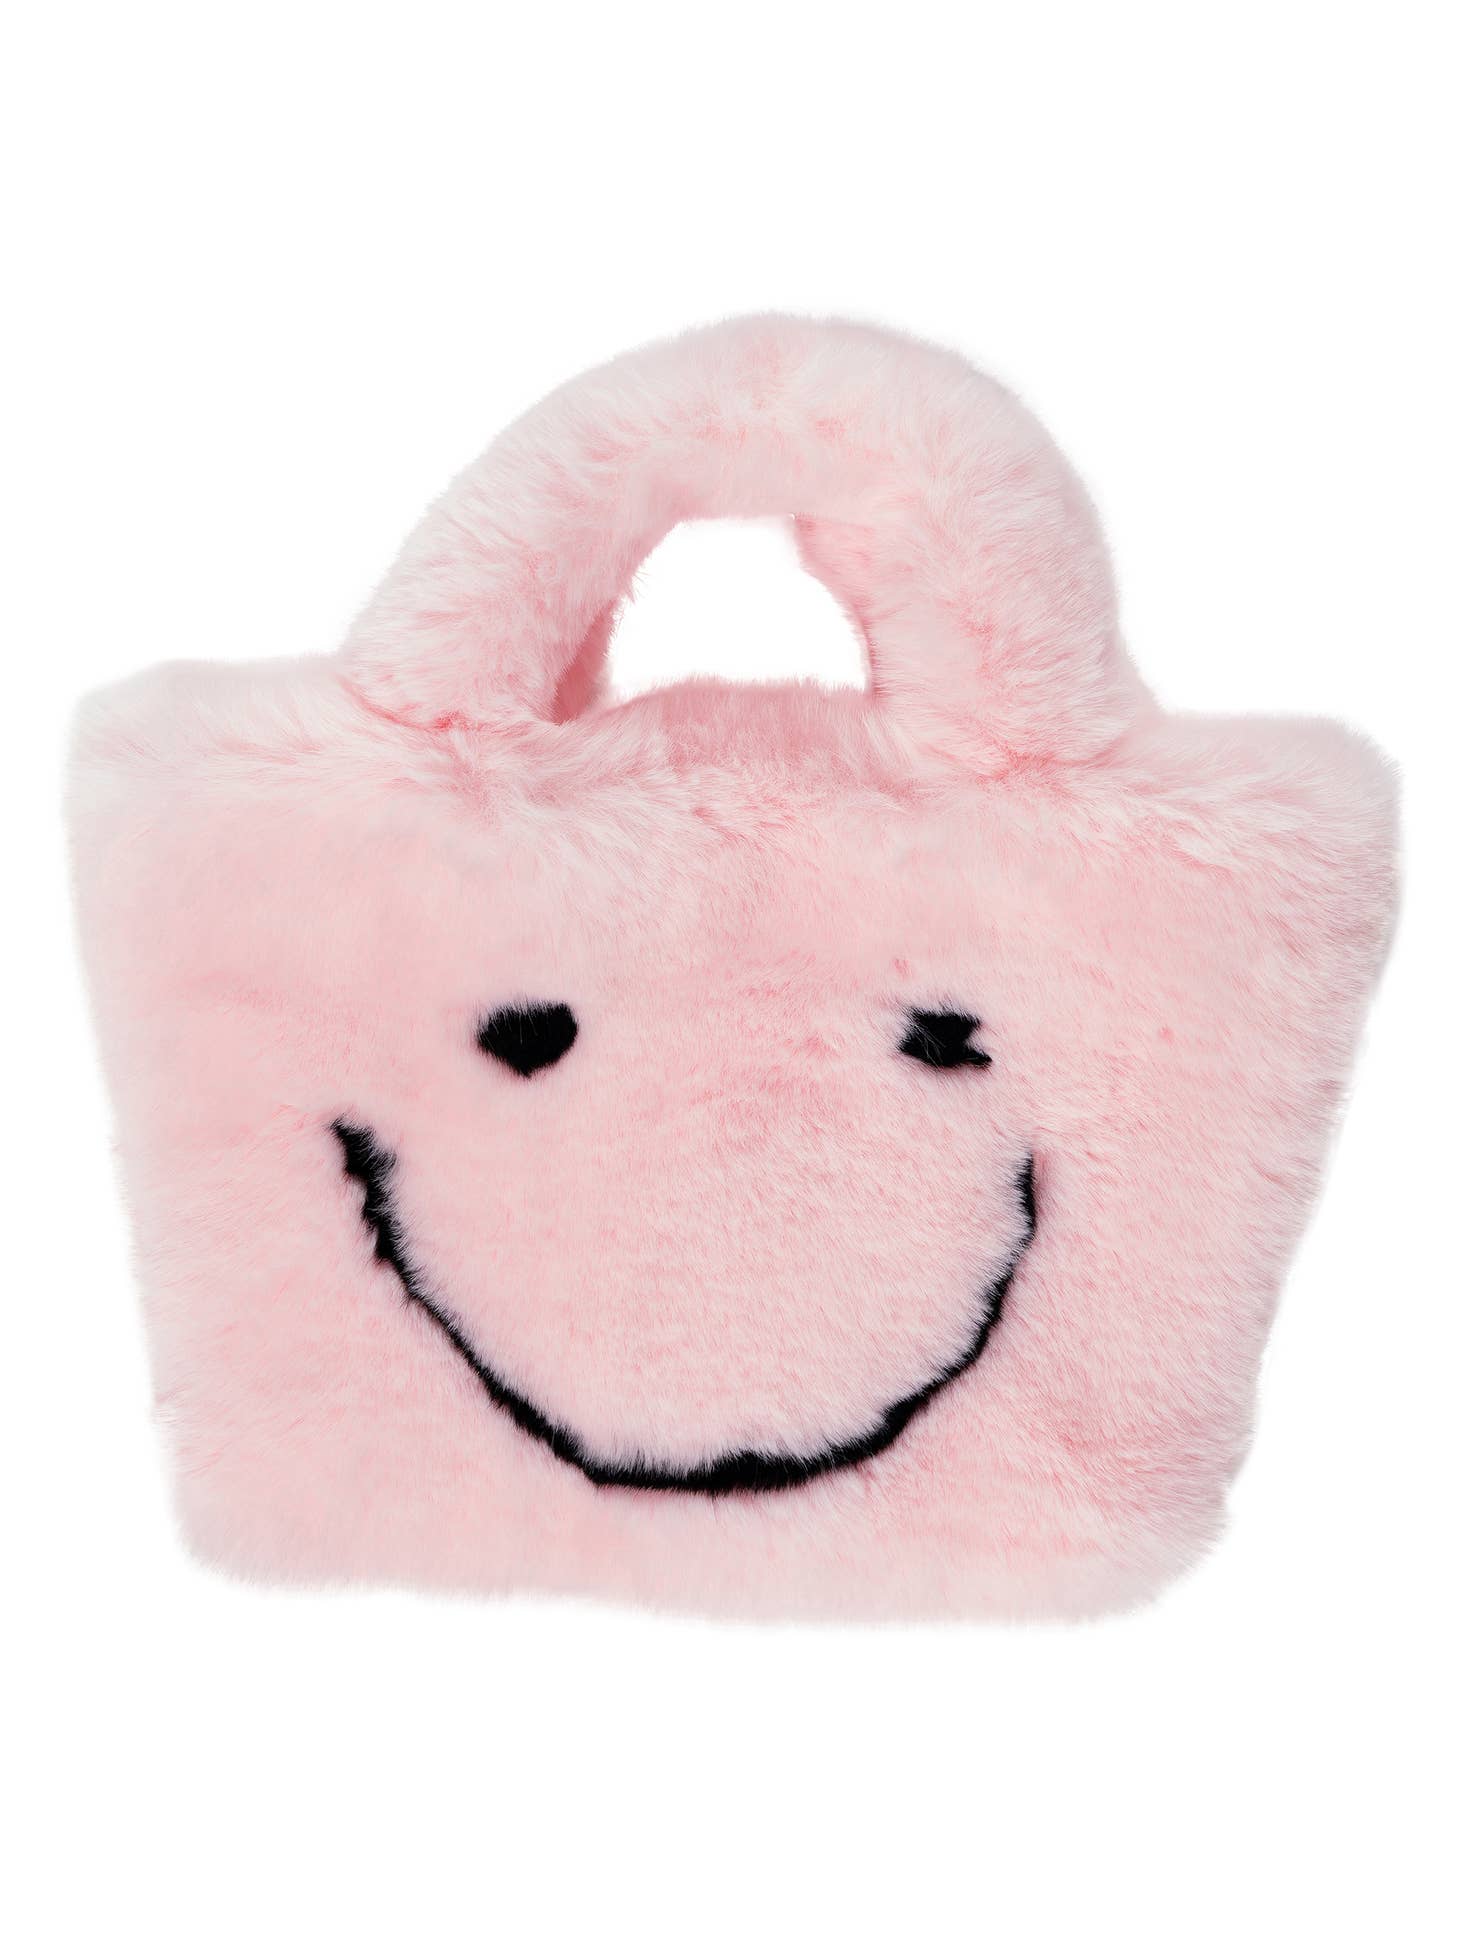 Faux Fur Fuzzy Smiley Face Purses for Kids - Favorite Little Things Co